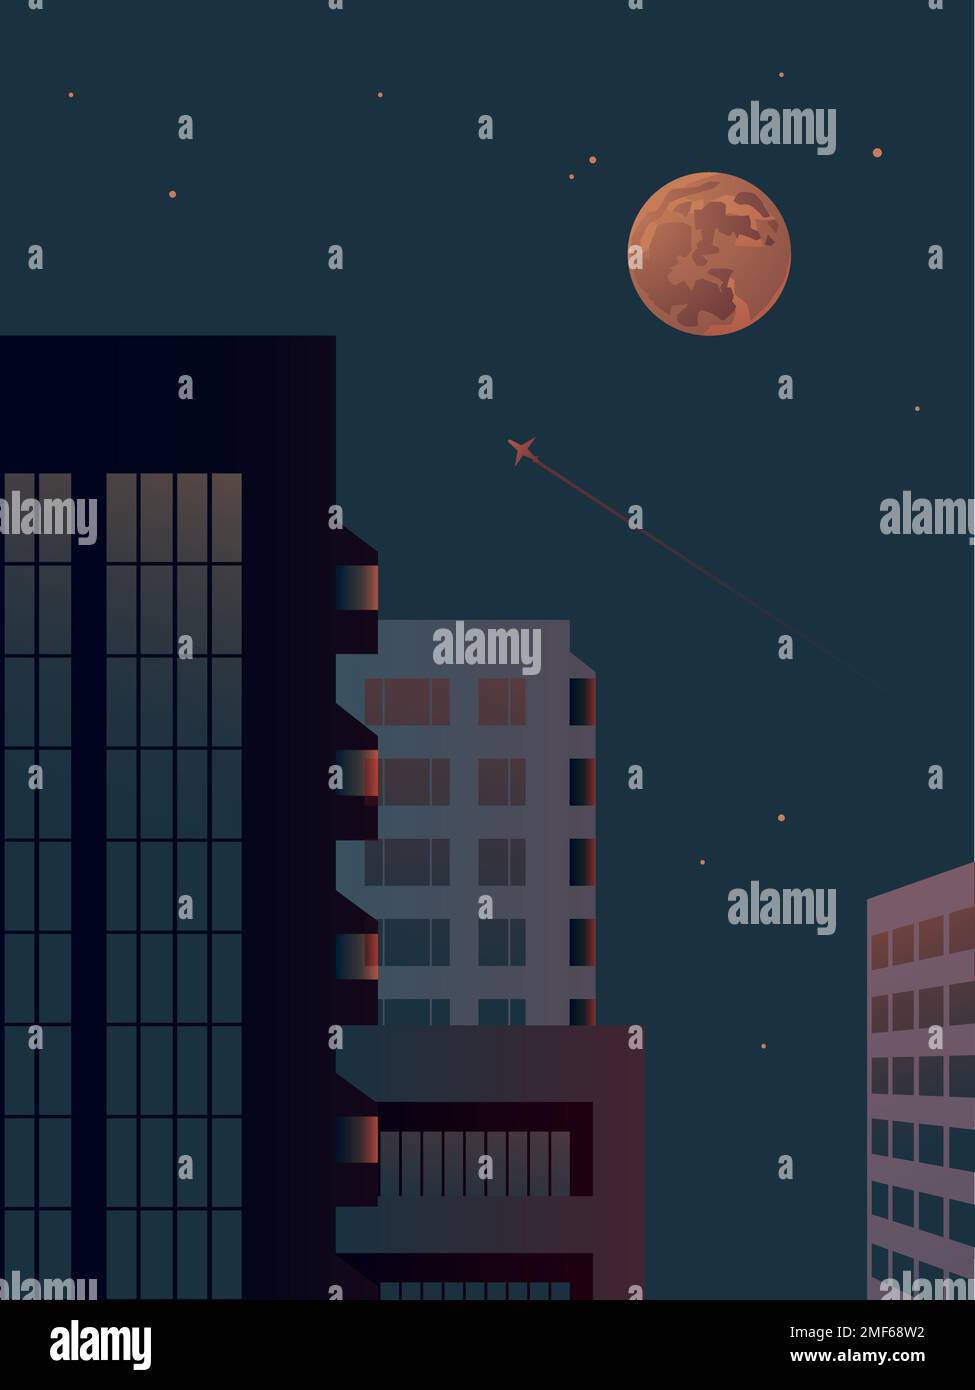 Sleeping downtown buildings illustration. Rooftops and windows view. Landscape of the night city and the moon. Modern buildings, architecture. Stock Vector